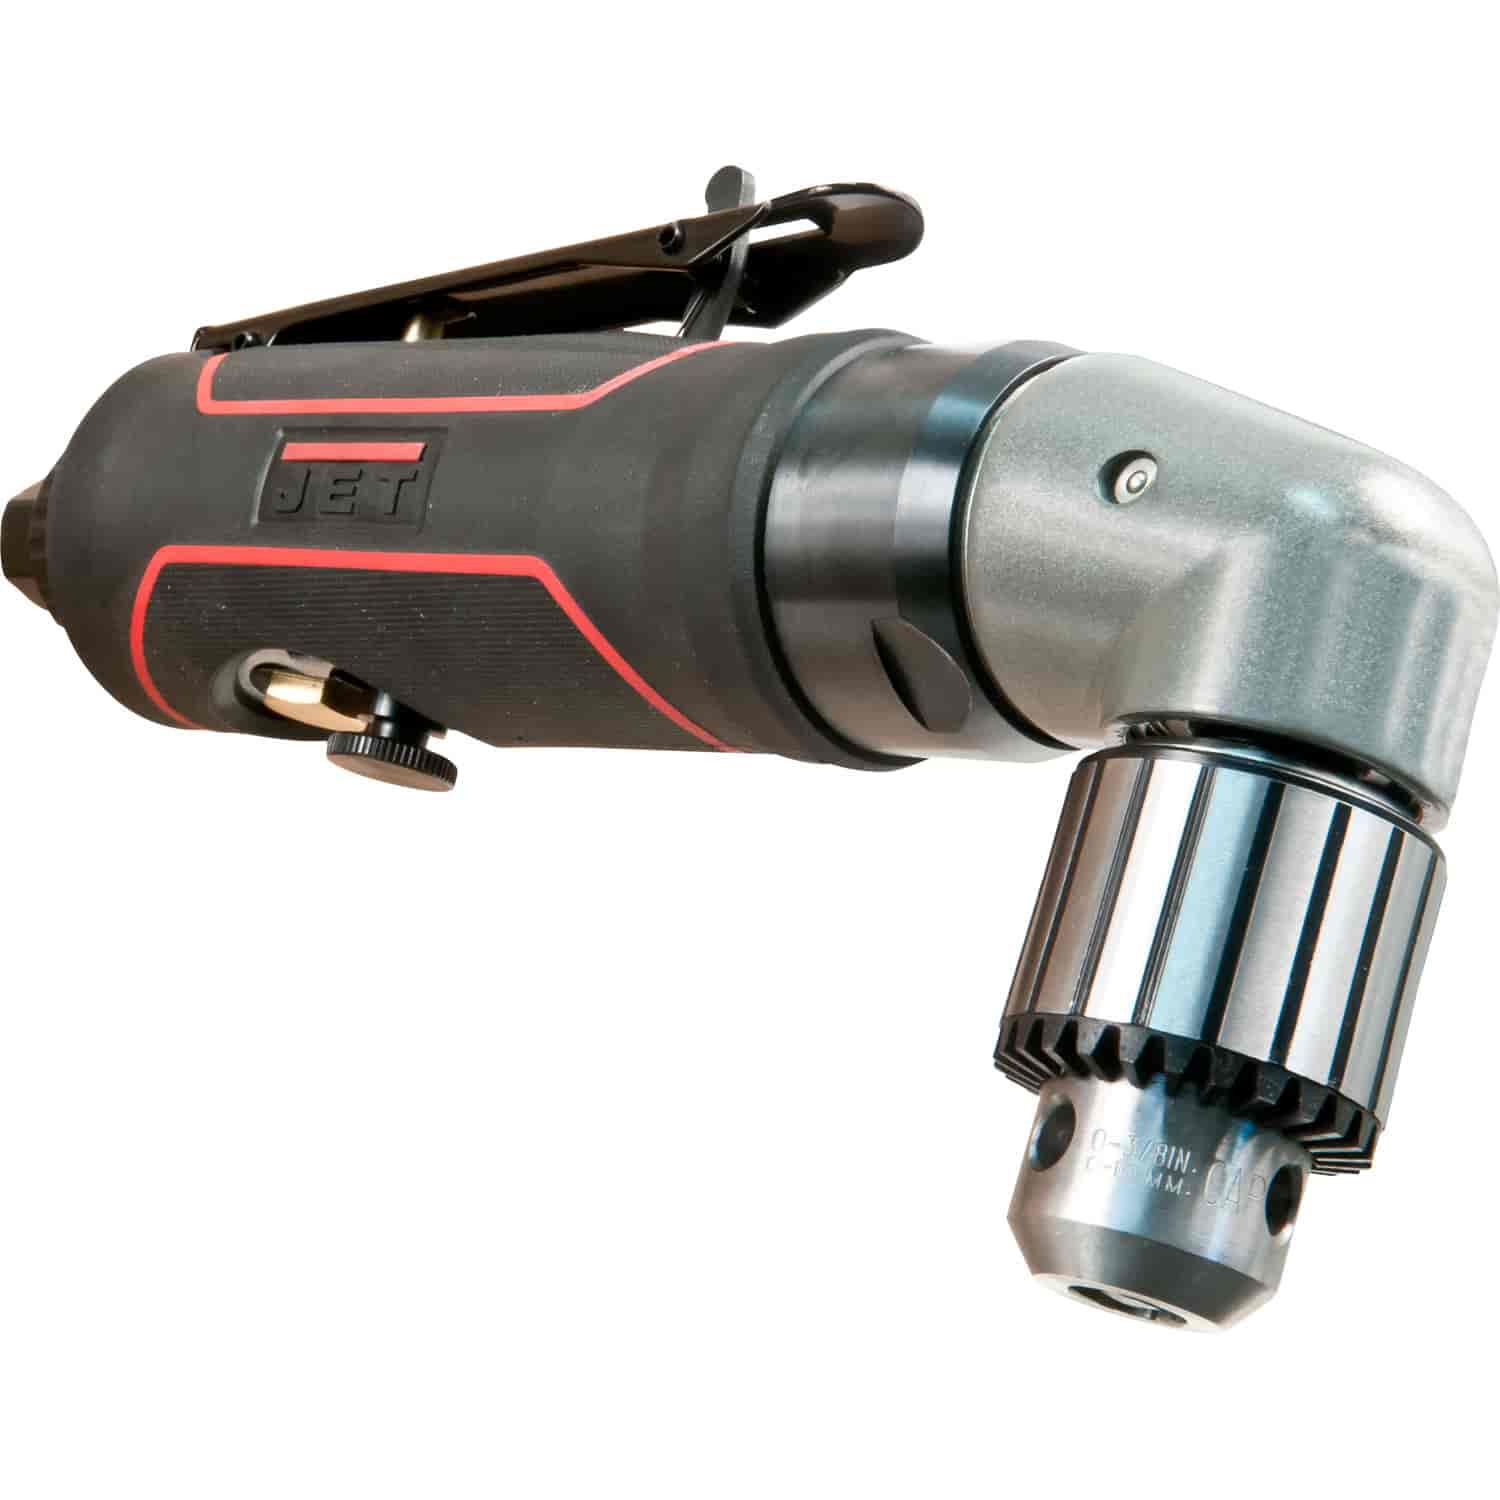 R12 3/8" Reversible Angled Air Drill Chuck size: 3/8"